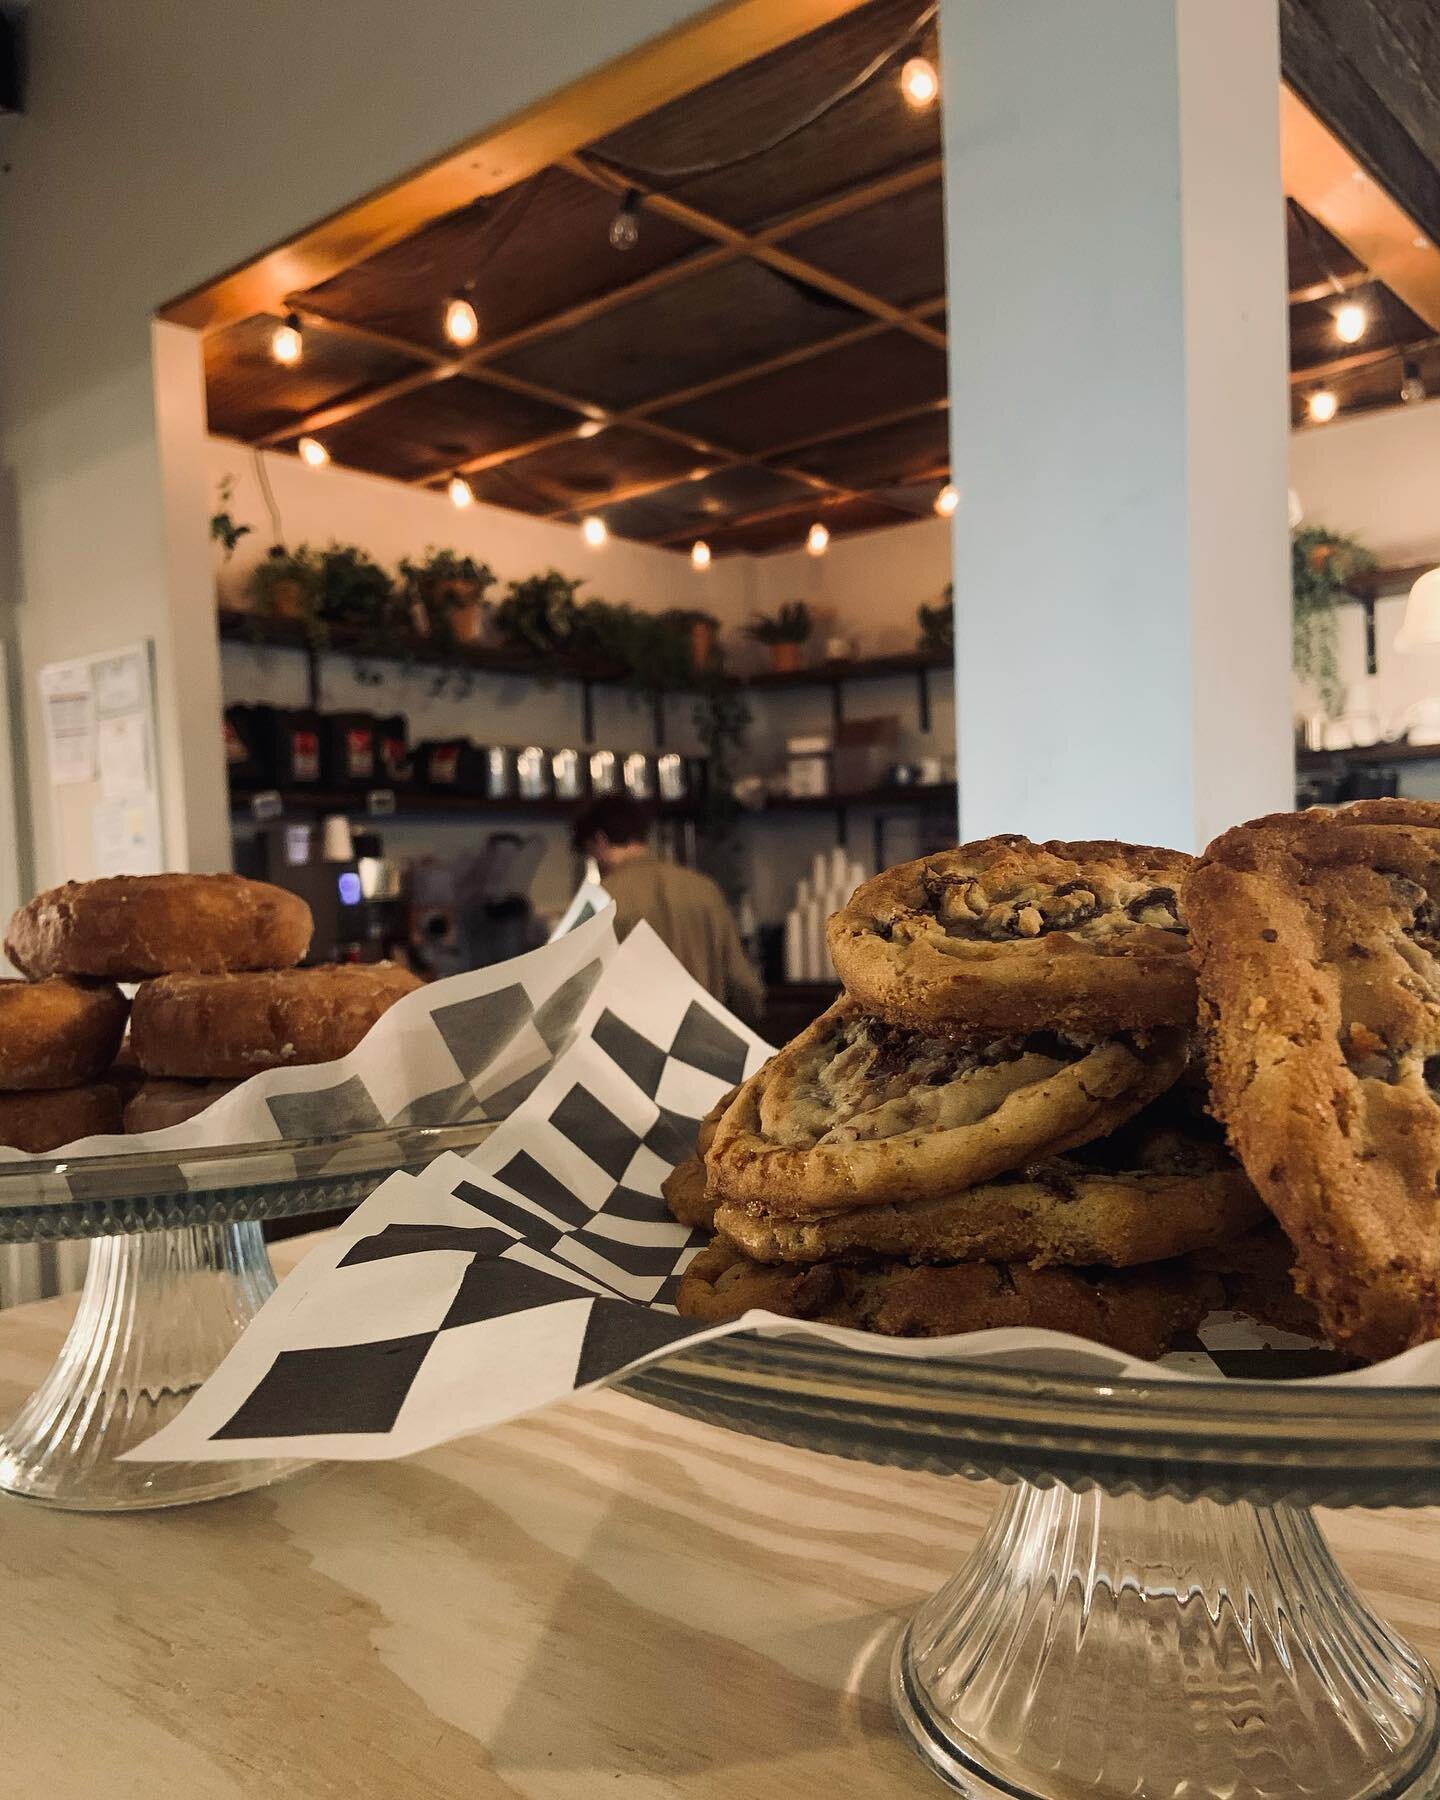 Donut now, cookie later kind of Friday.

#fridayvibes #shoplocal #poetscoffee #localcoffee #allthedesserts